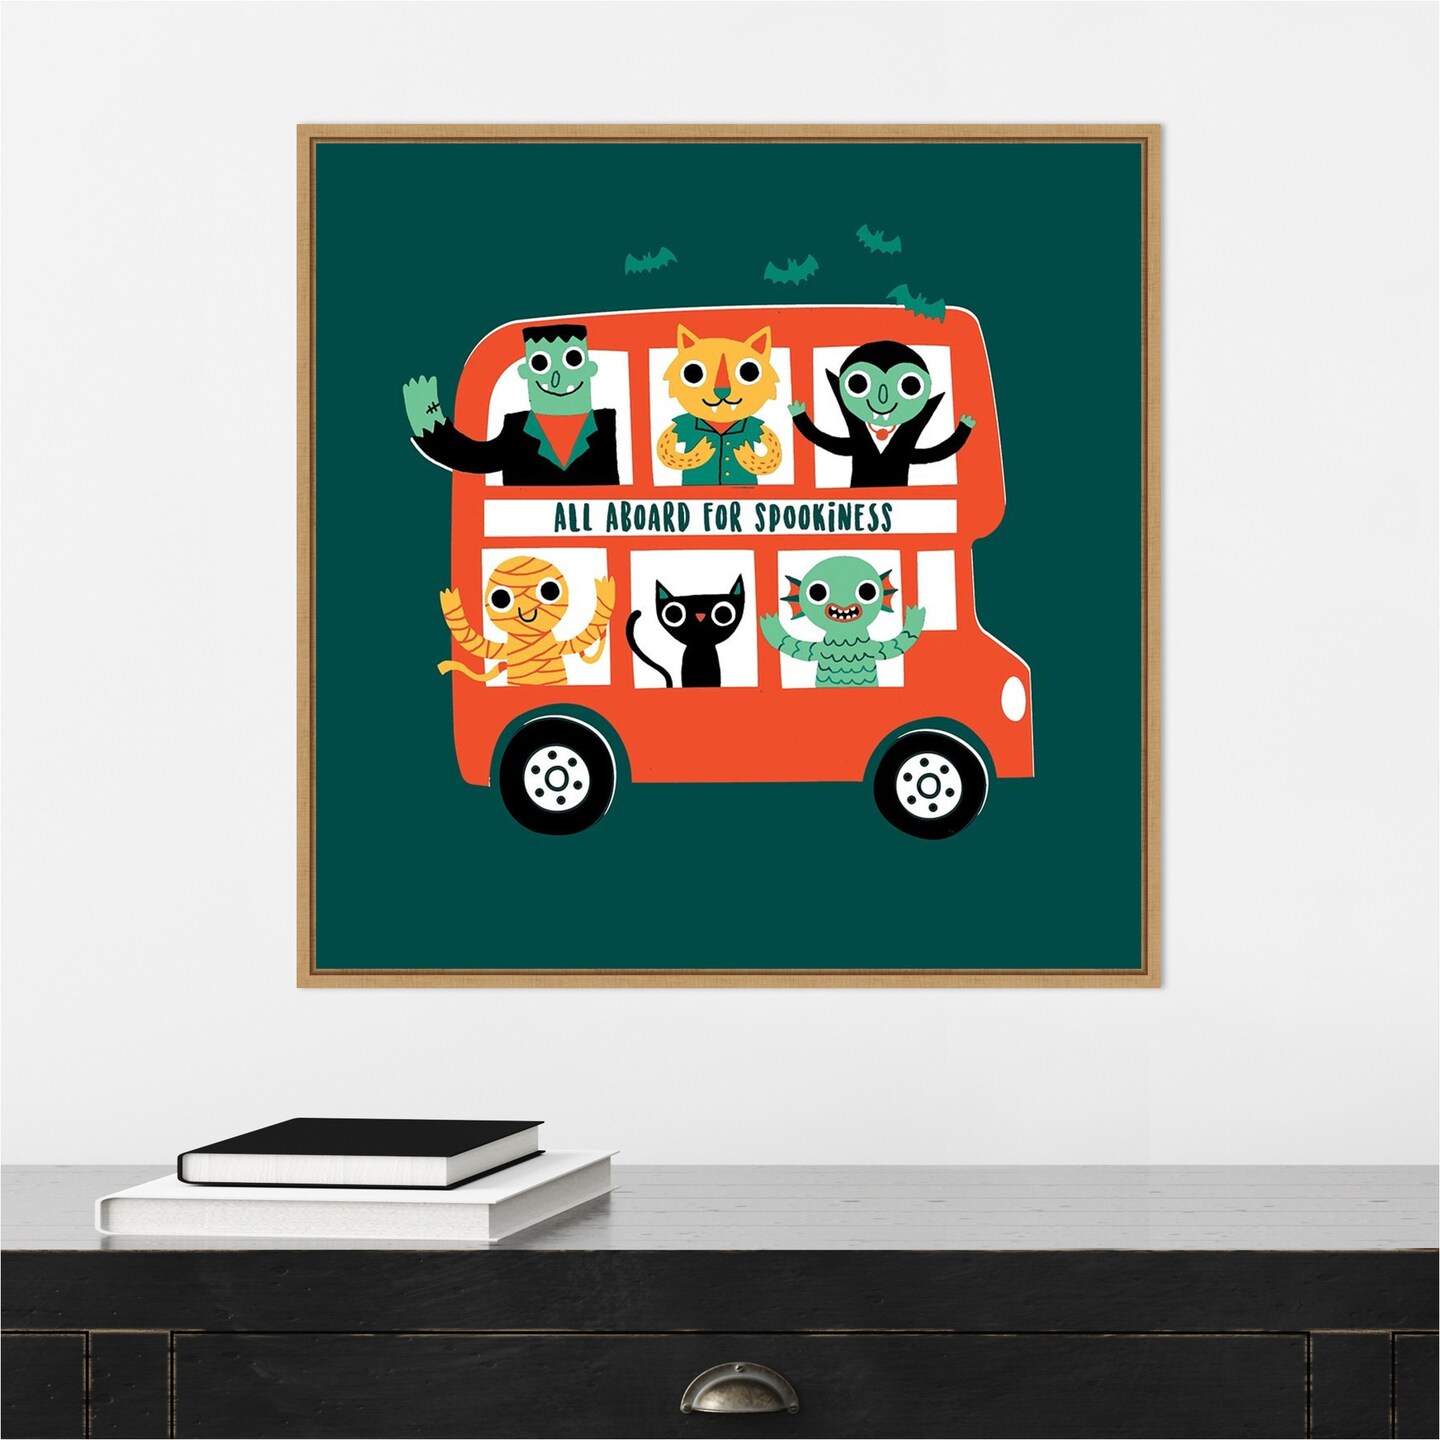 Spooky Bus by Michael Buxton 22-in. W x 22-in. H. Canvas Wall Art Print Framed in Natural